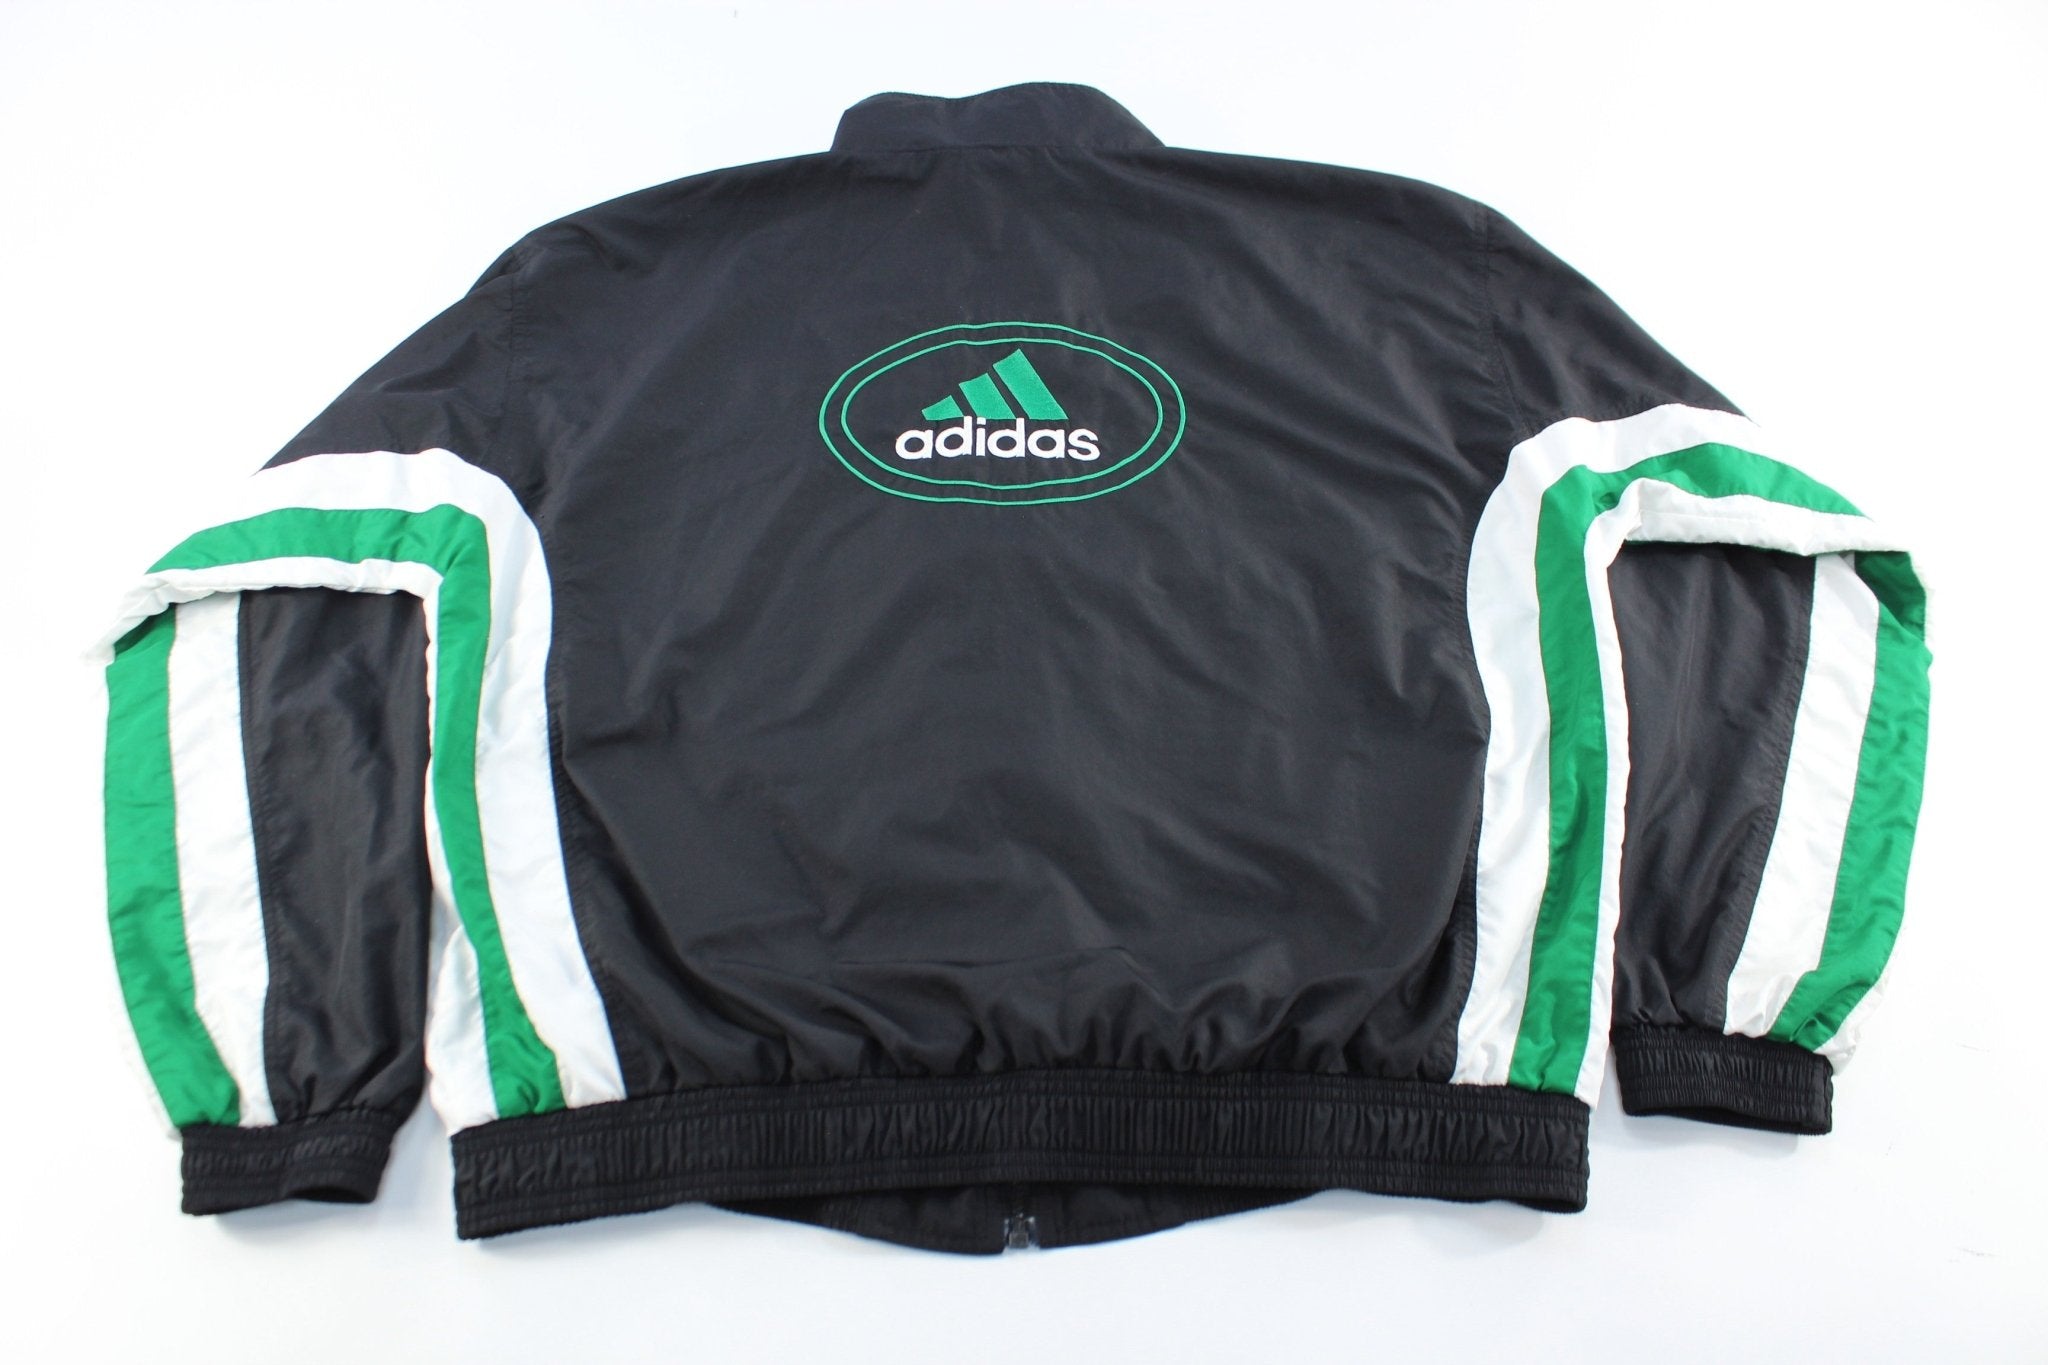 90's Adidas Embroidered Logo Black, White, & Green Zip Up Jacket - ThriftedThreads.com